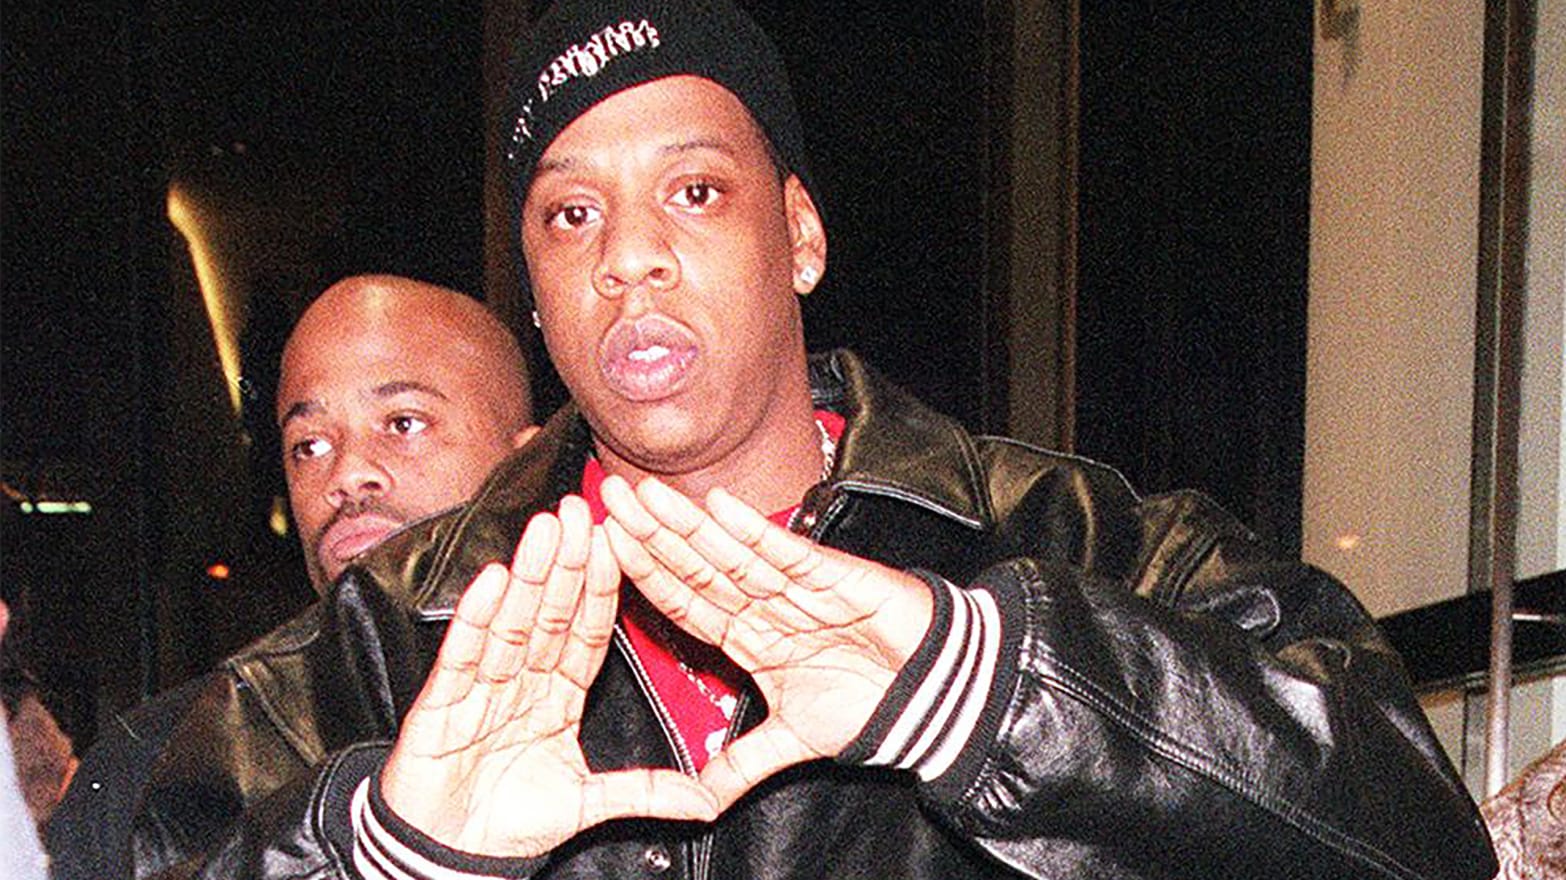 How the Illuminati Stole the Mind, Soul, and Body of Hip-Hop
